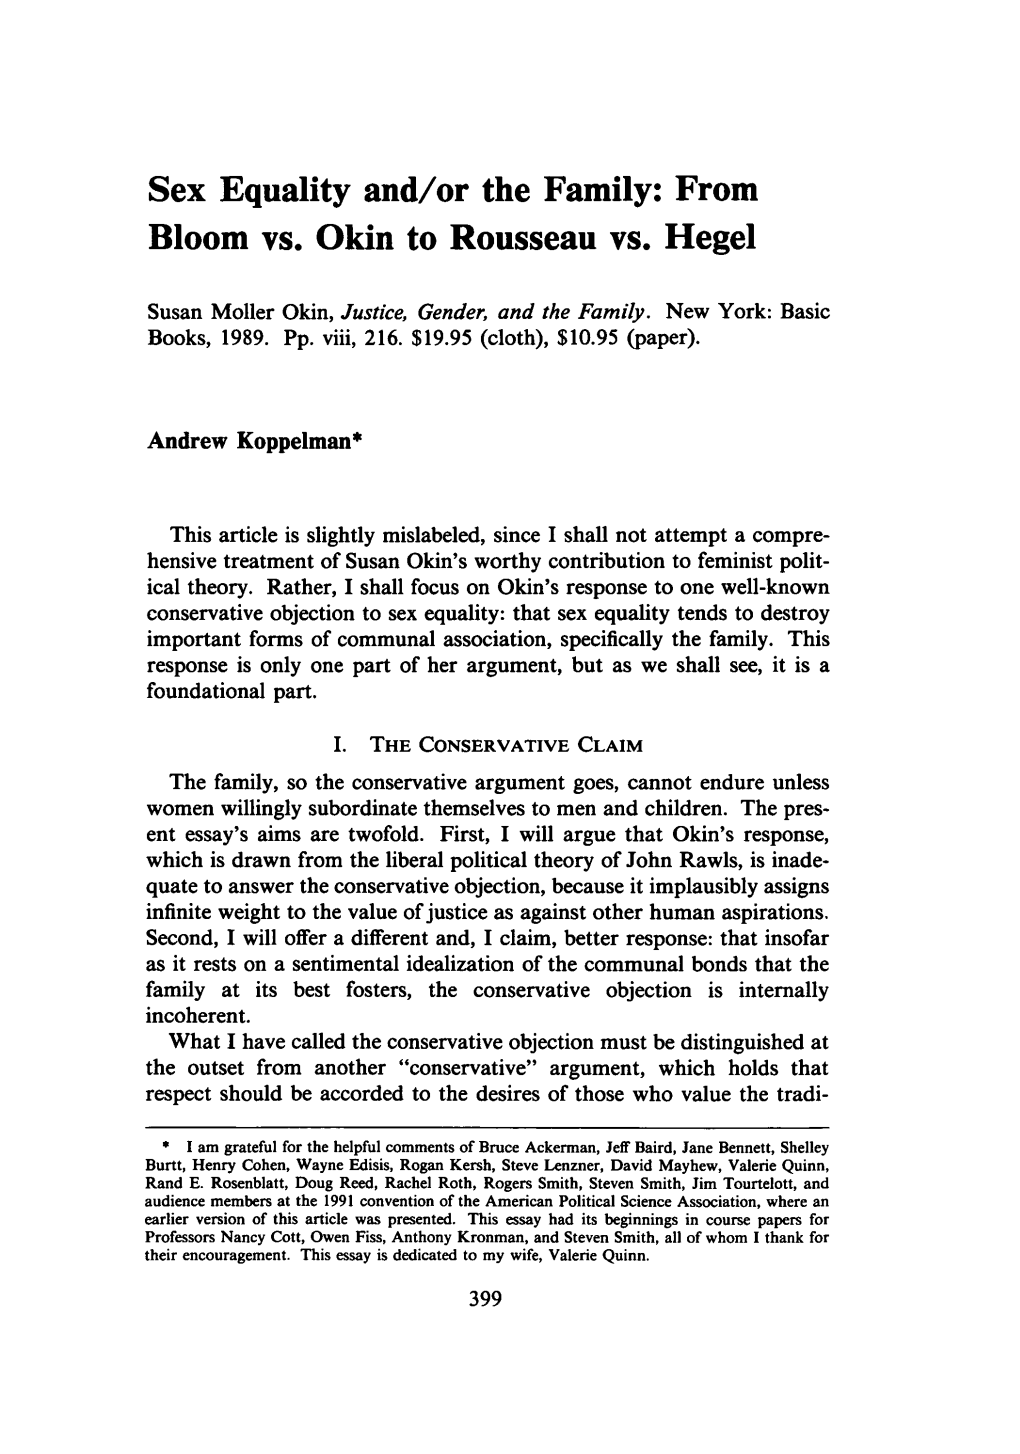 Sex Equality And/Or the Family: from Bloom Vs. Okin to Rousseau Vs. Hegel